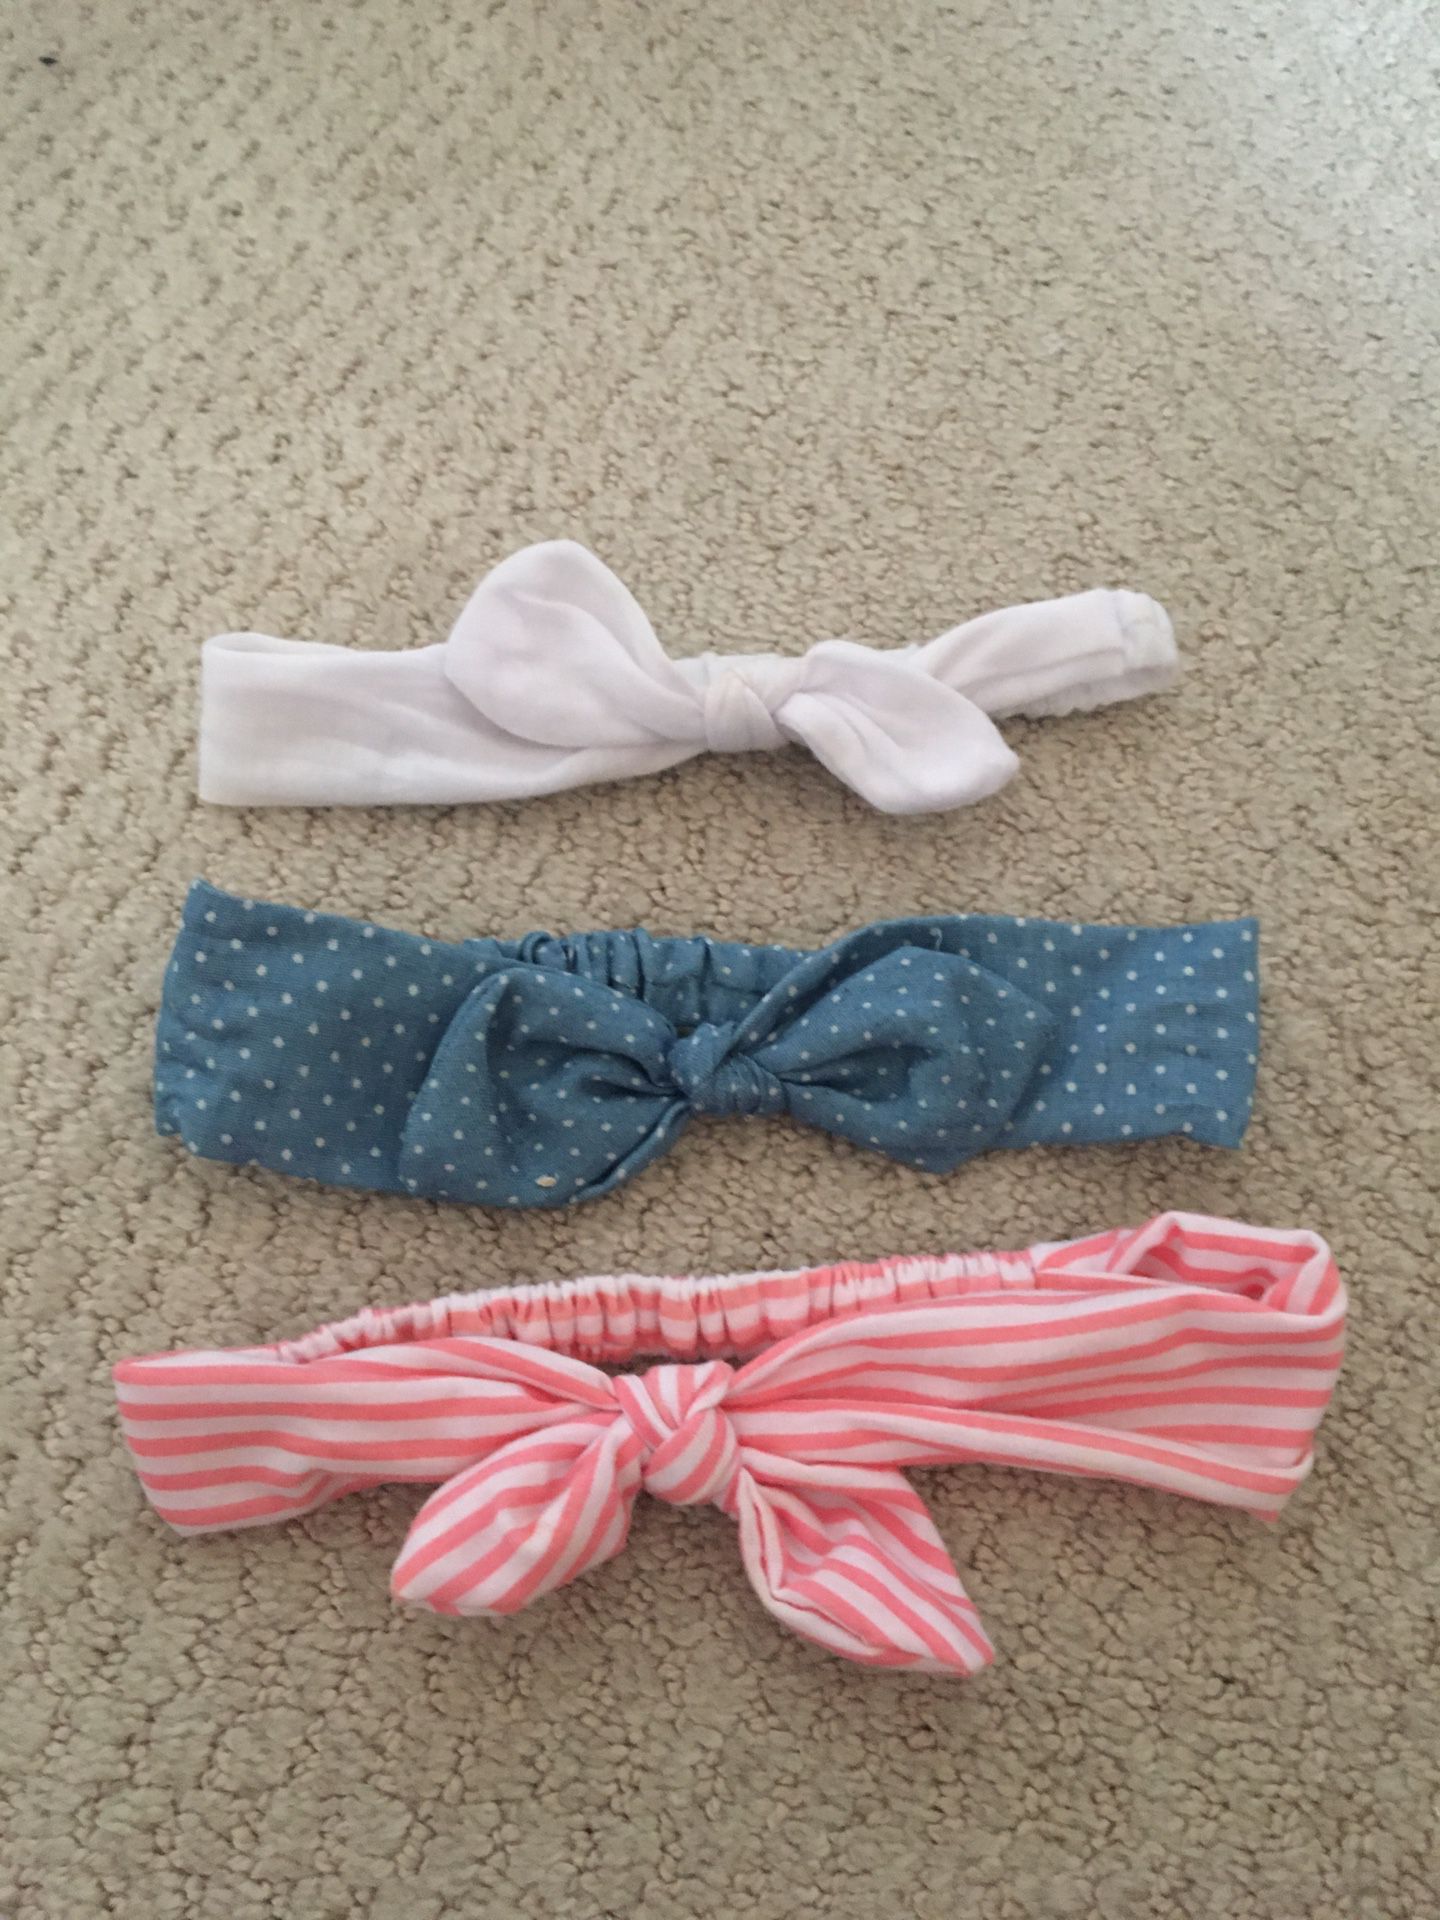 Hair bands for baby girl